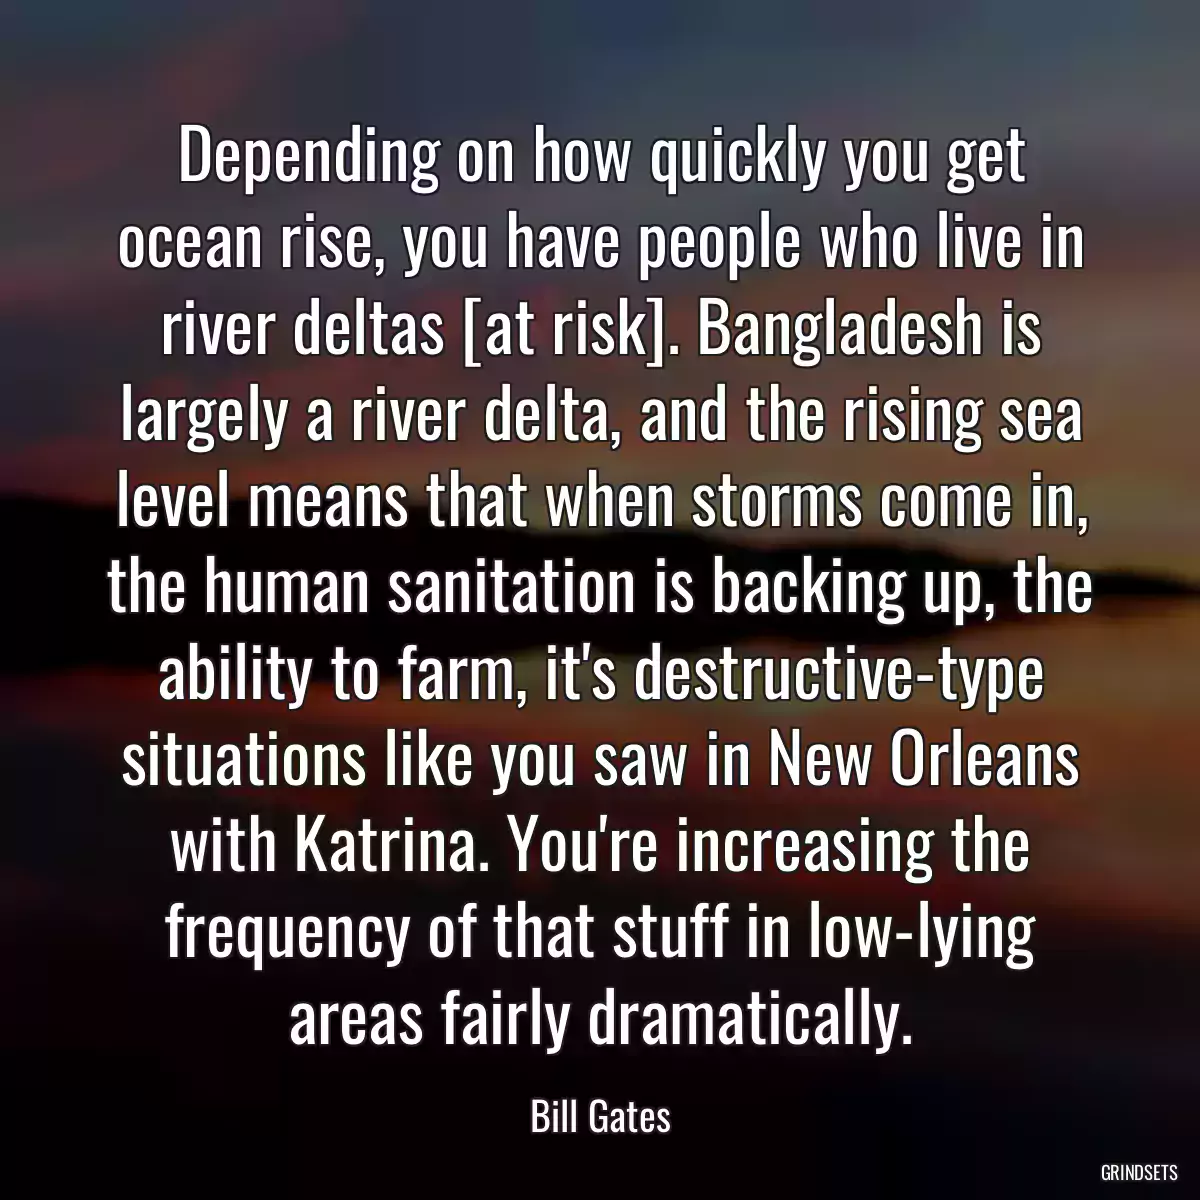 Depending on how quickly you get ocean rise, you have people who live in river deltas [at risk]. Bangladesh is largely a river delta, and the rising sea level means that when storms come in, the human sanitation is backing up, the ability to farm, it\'s destructive-type situations like you saw in New Orleans with Katrina. You\'re increasing the frequency of that stuff in low-lying areas fairly dramatically.